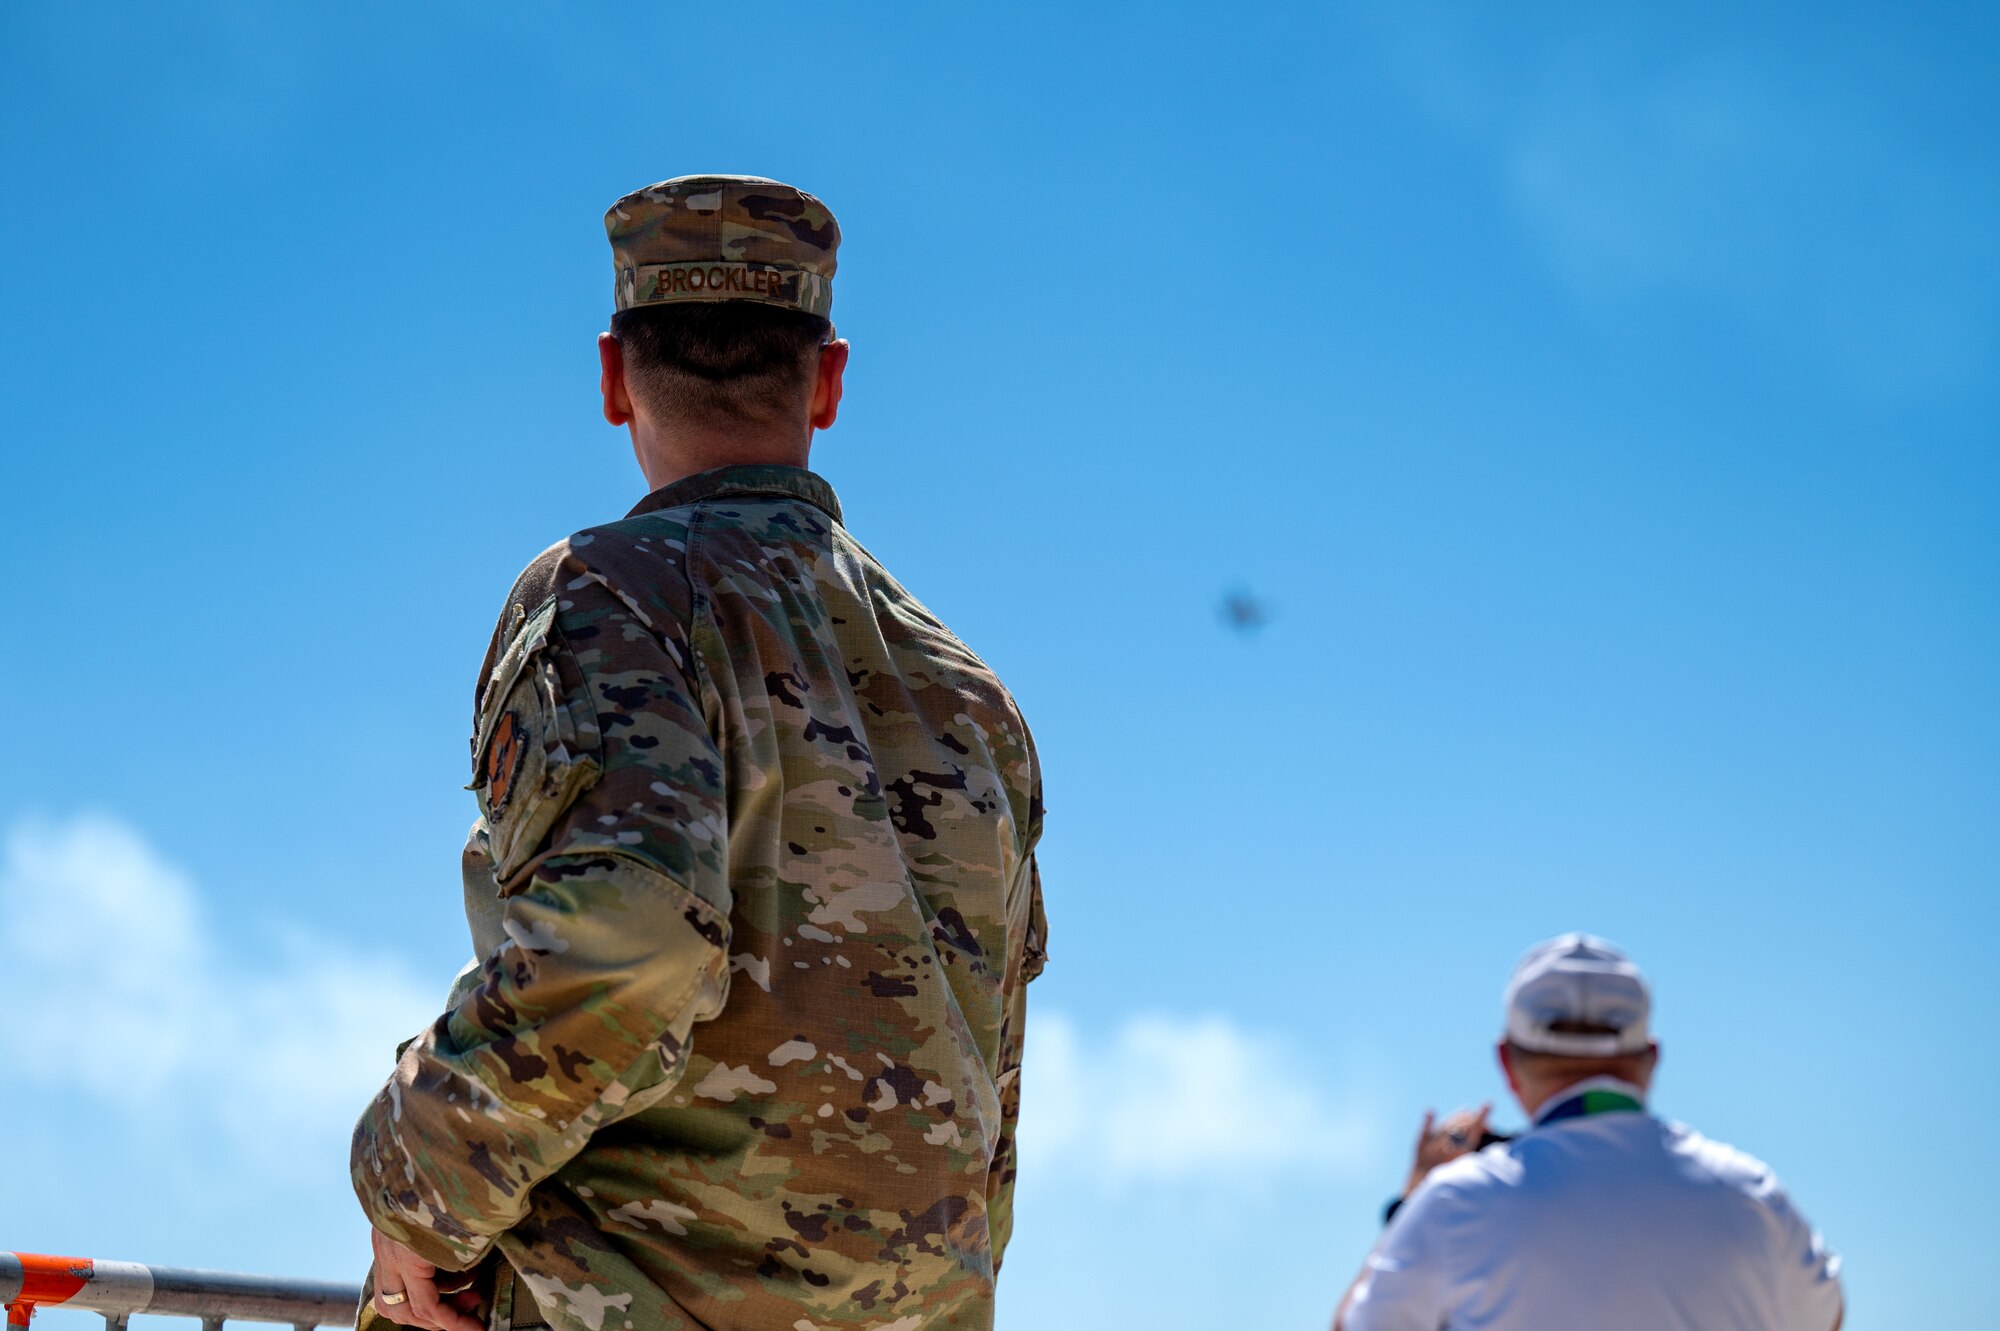 U.S. Air Force Lt. Col. Kevin Brockler, 81st Mission Support Group deputy commander, views the Thunderbirds practice session for the 2023 Thunder Over the Sound Air and Space Show at Biloxi Beach in Biloxi, Mississippi, April 28, 2023. Thunder Over the Sound is a unique event where a military installation and its surrounding city jointly host an air show in two locations; Biloxi Beach and Keesler's flightline. (U.S. Air Force photo by Airman 1st Class Trenten Walters)